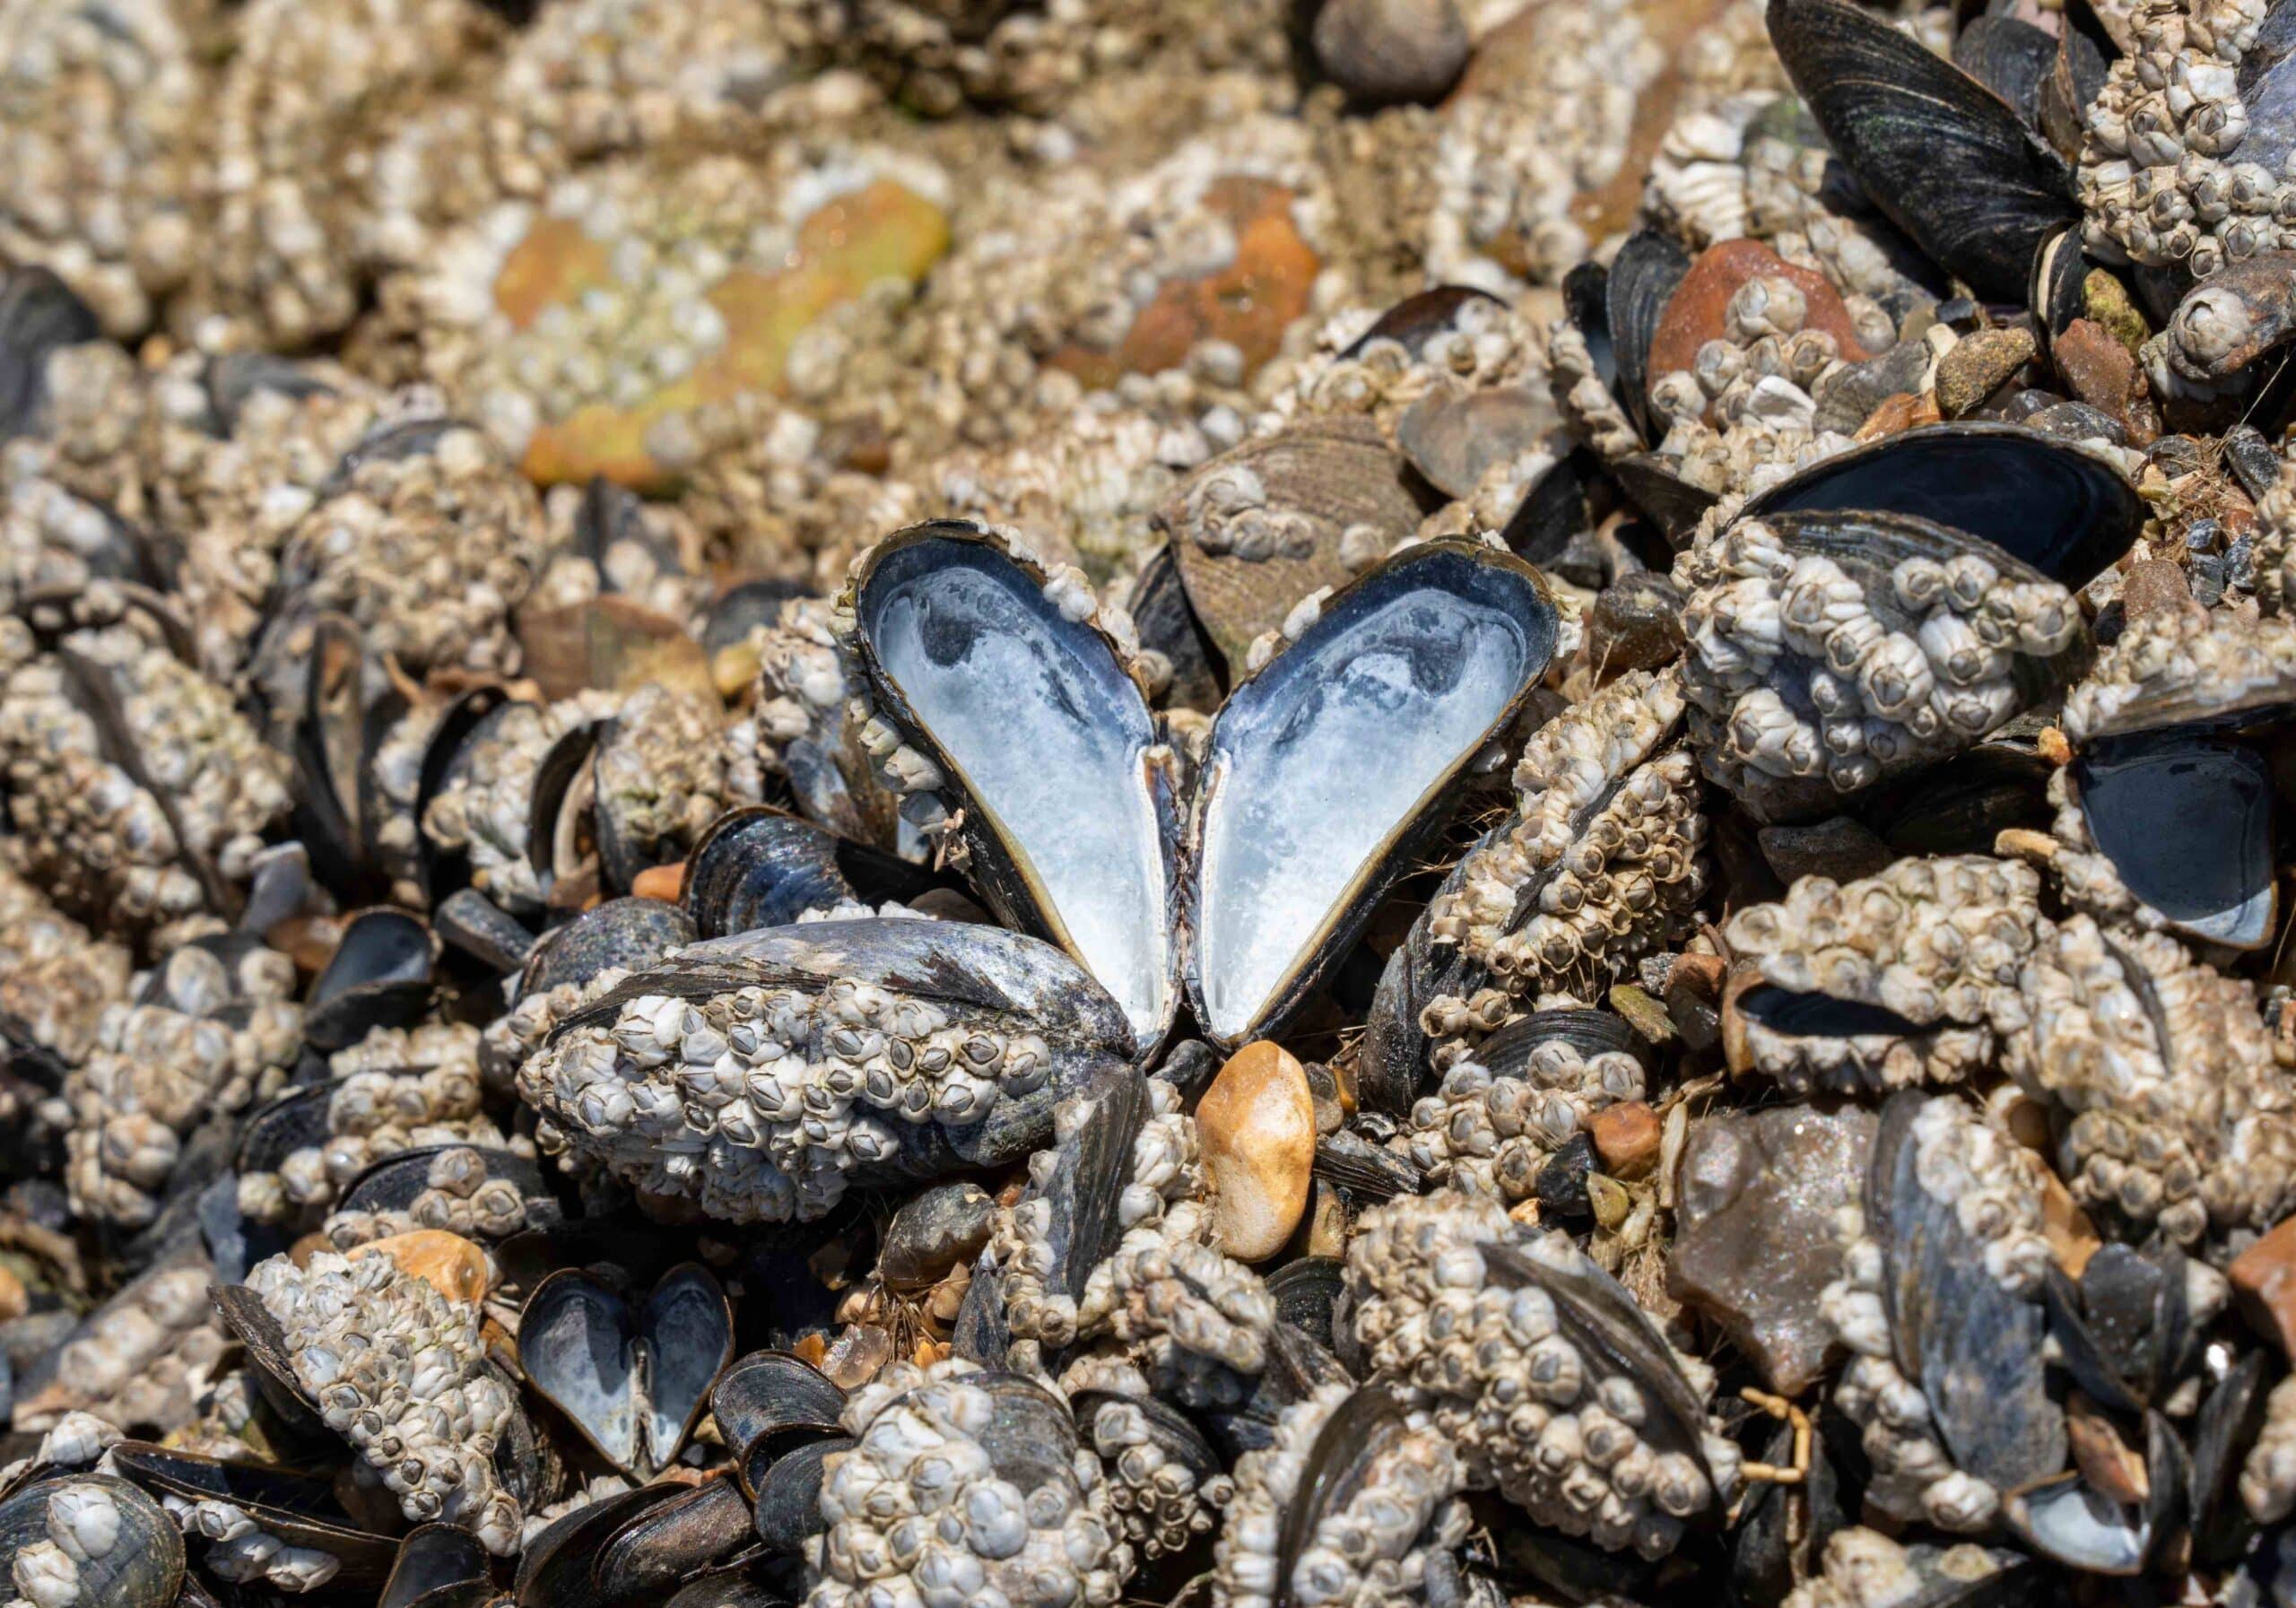 A bed of blue mussels covered in barnacles in an intertidal zone. A single shell stands open and attached to the rocks creating a pearlescent heart or butterfly shaped pattern.